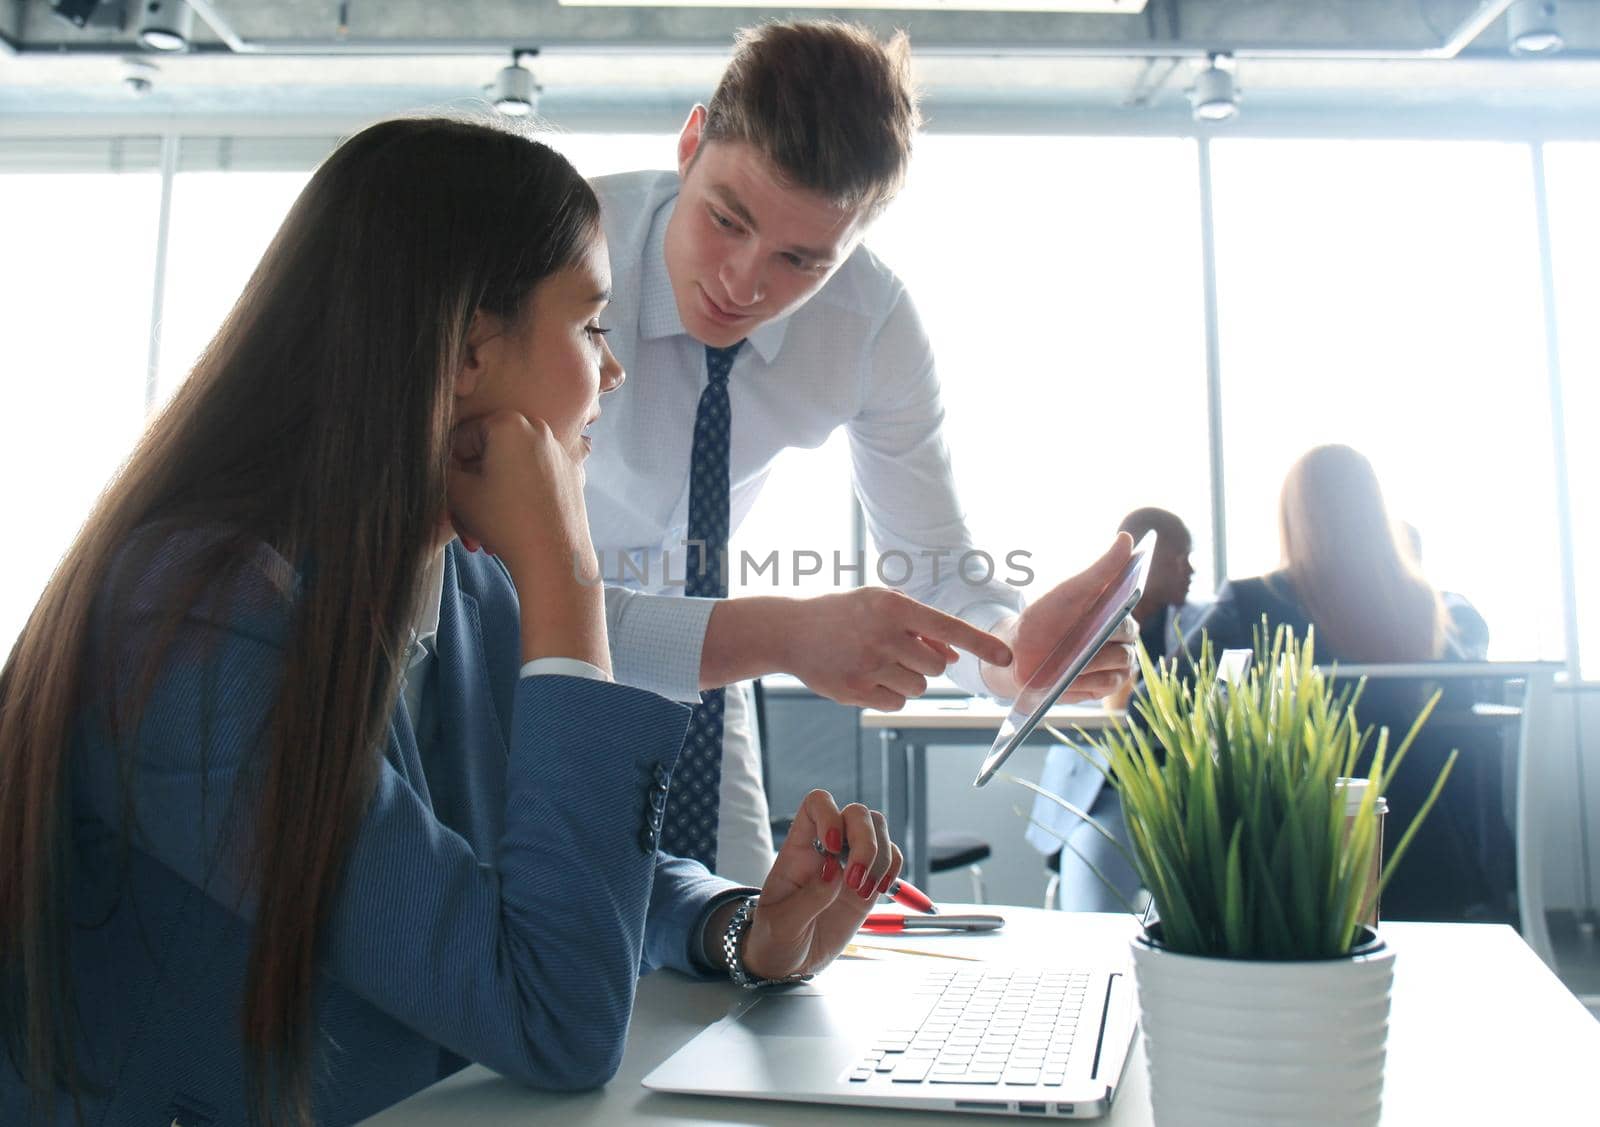 Image of two young business partners discussing plans or ideas at meeting